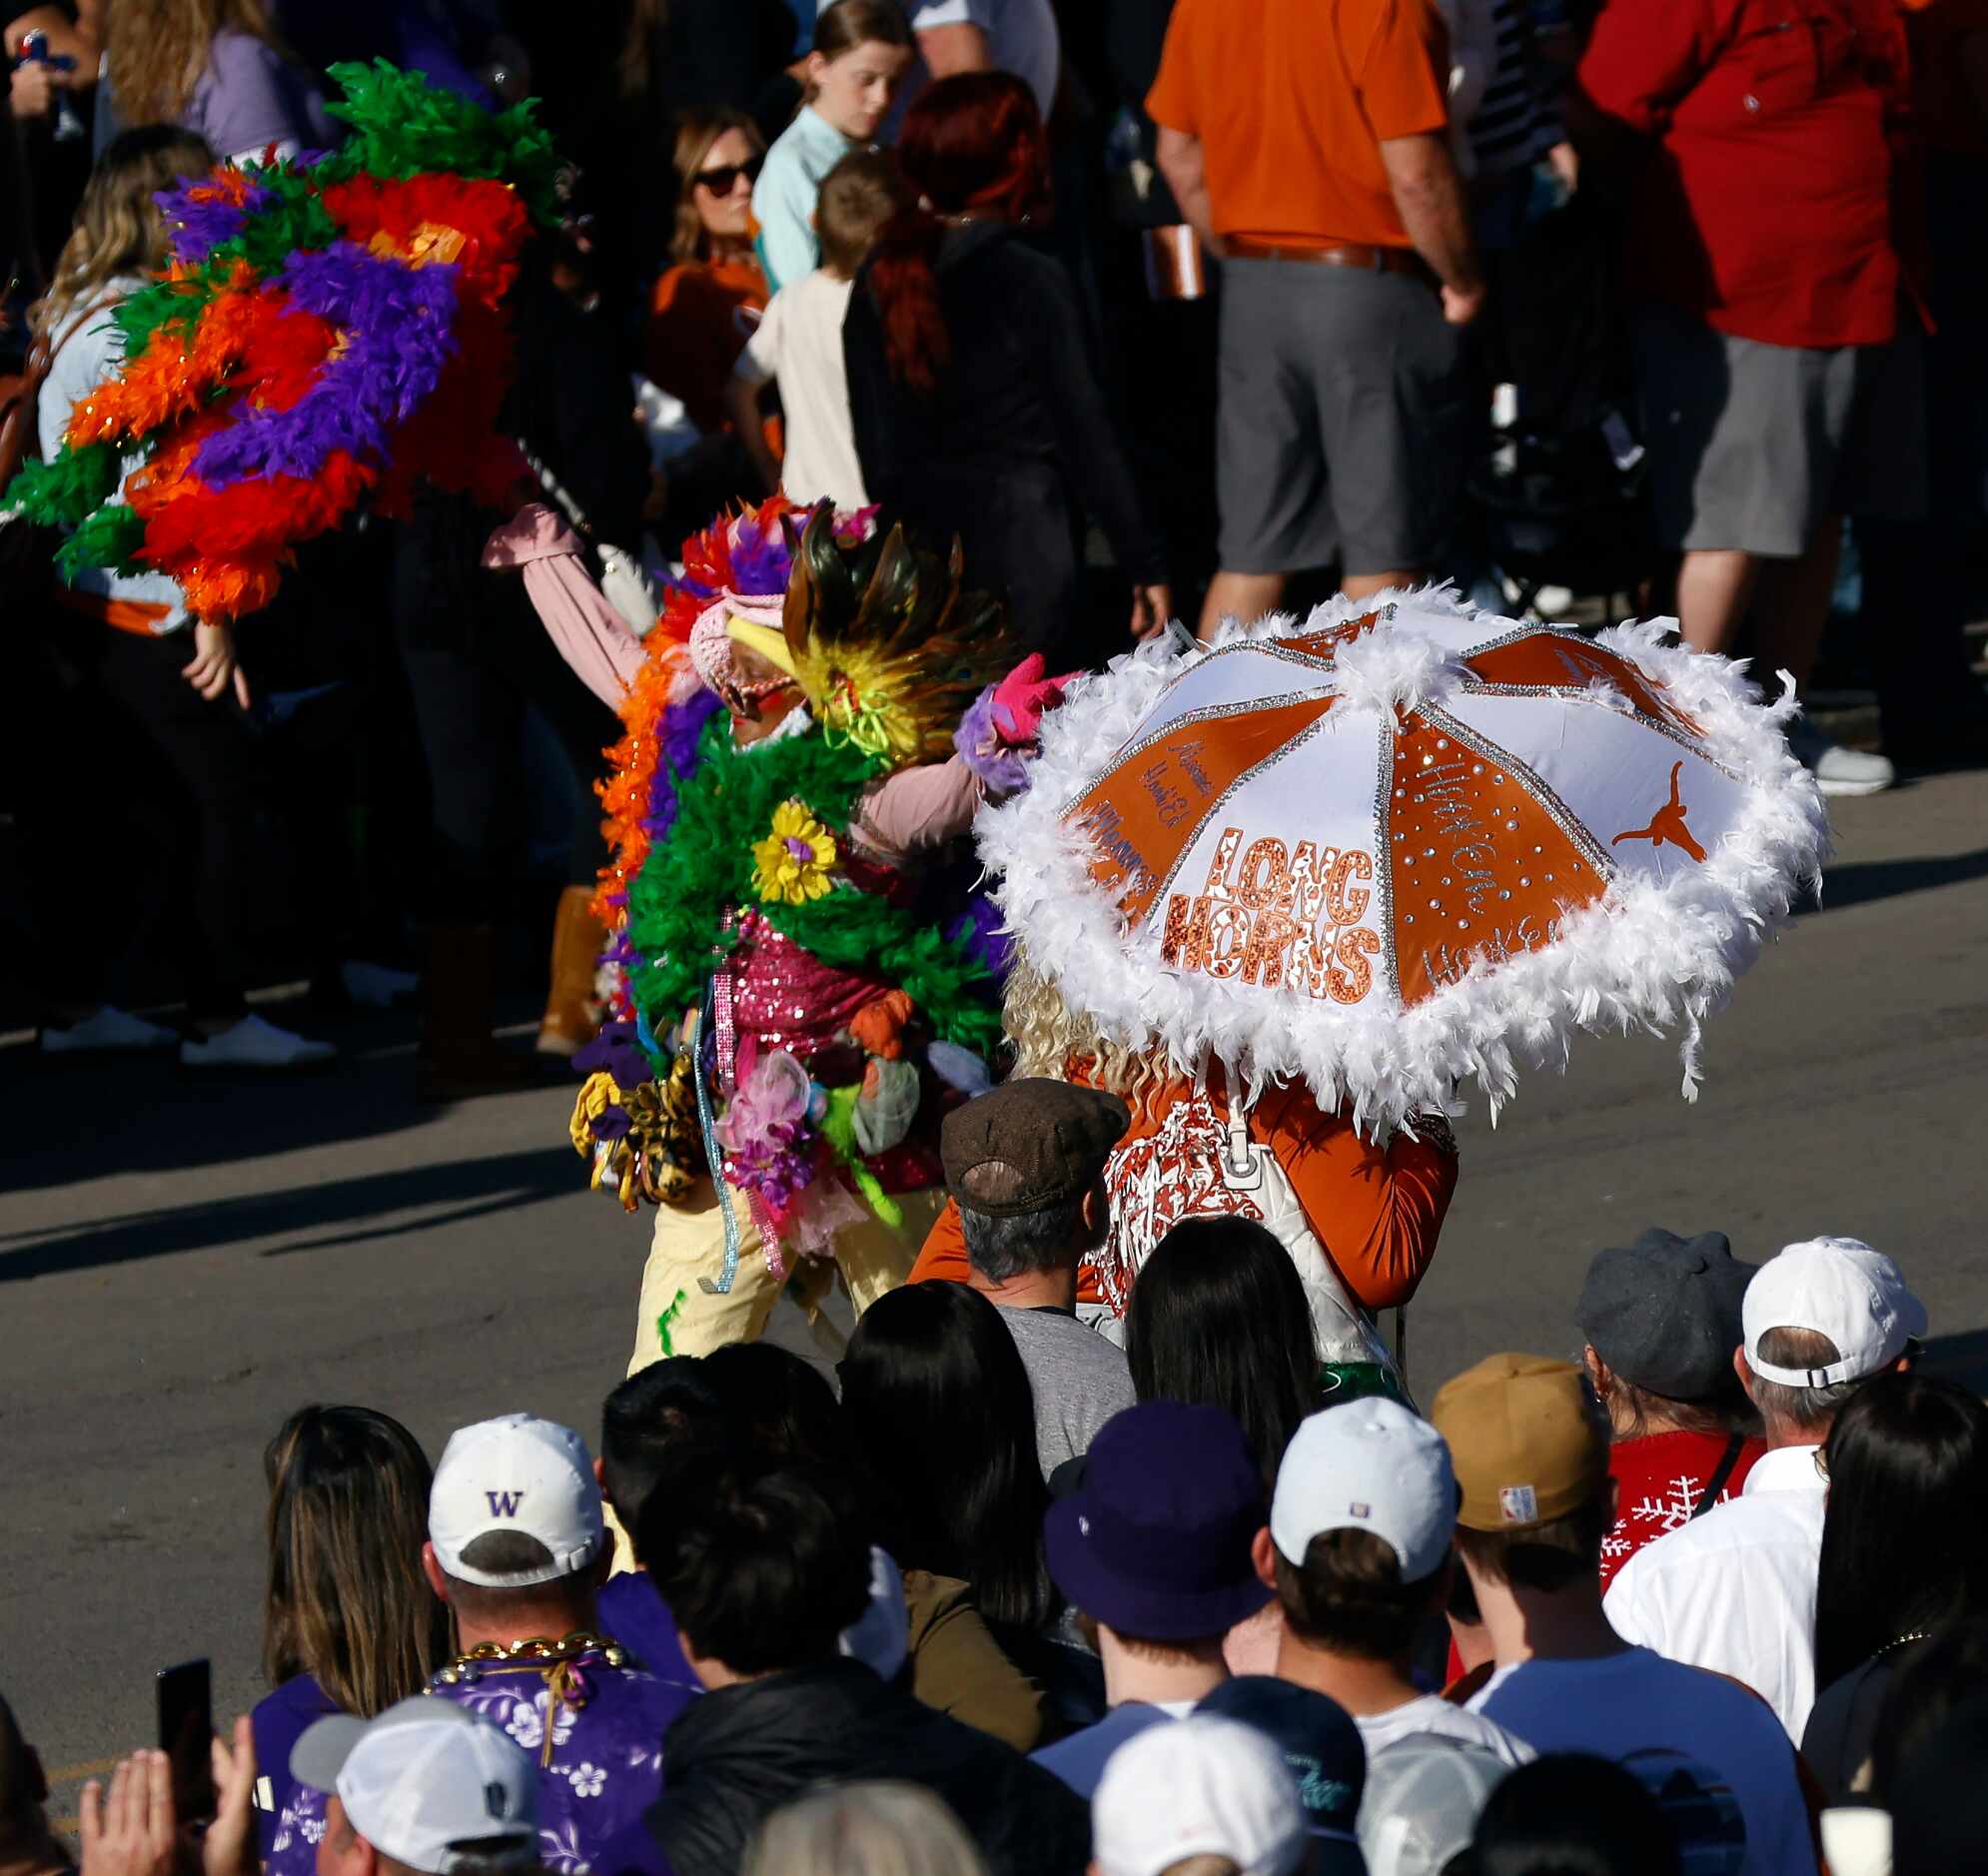 A p[air of ladies with colorful umbrellas entertain the fans before the Mardi Gras-style...